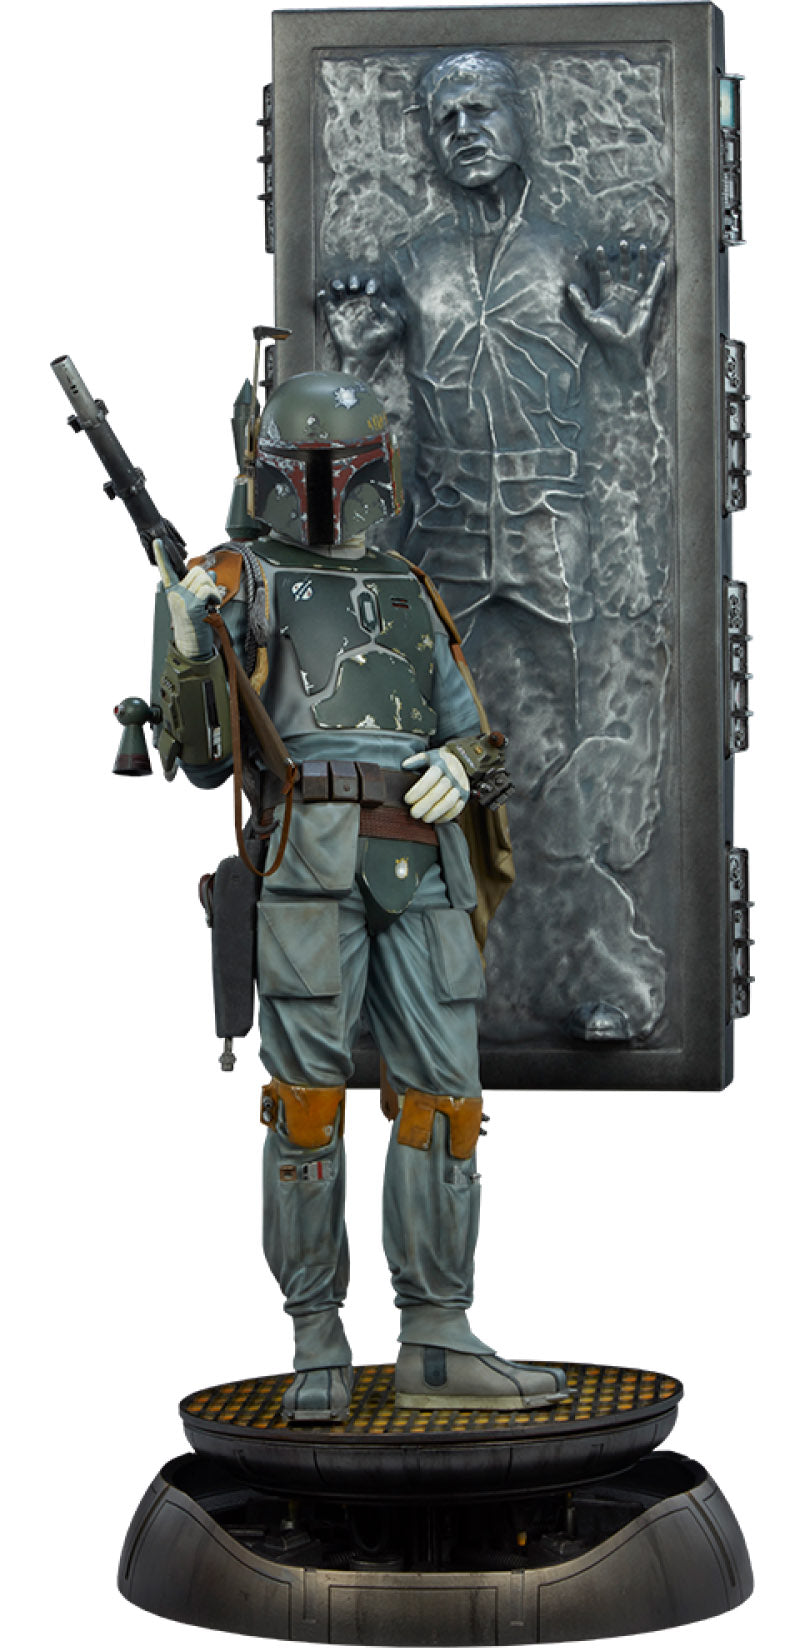 Sideshow Boba Fett and Han Solo in Carbonite Premium Format Figure